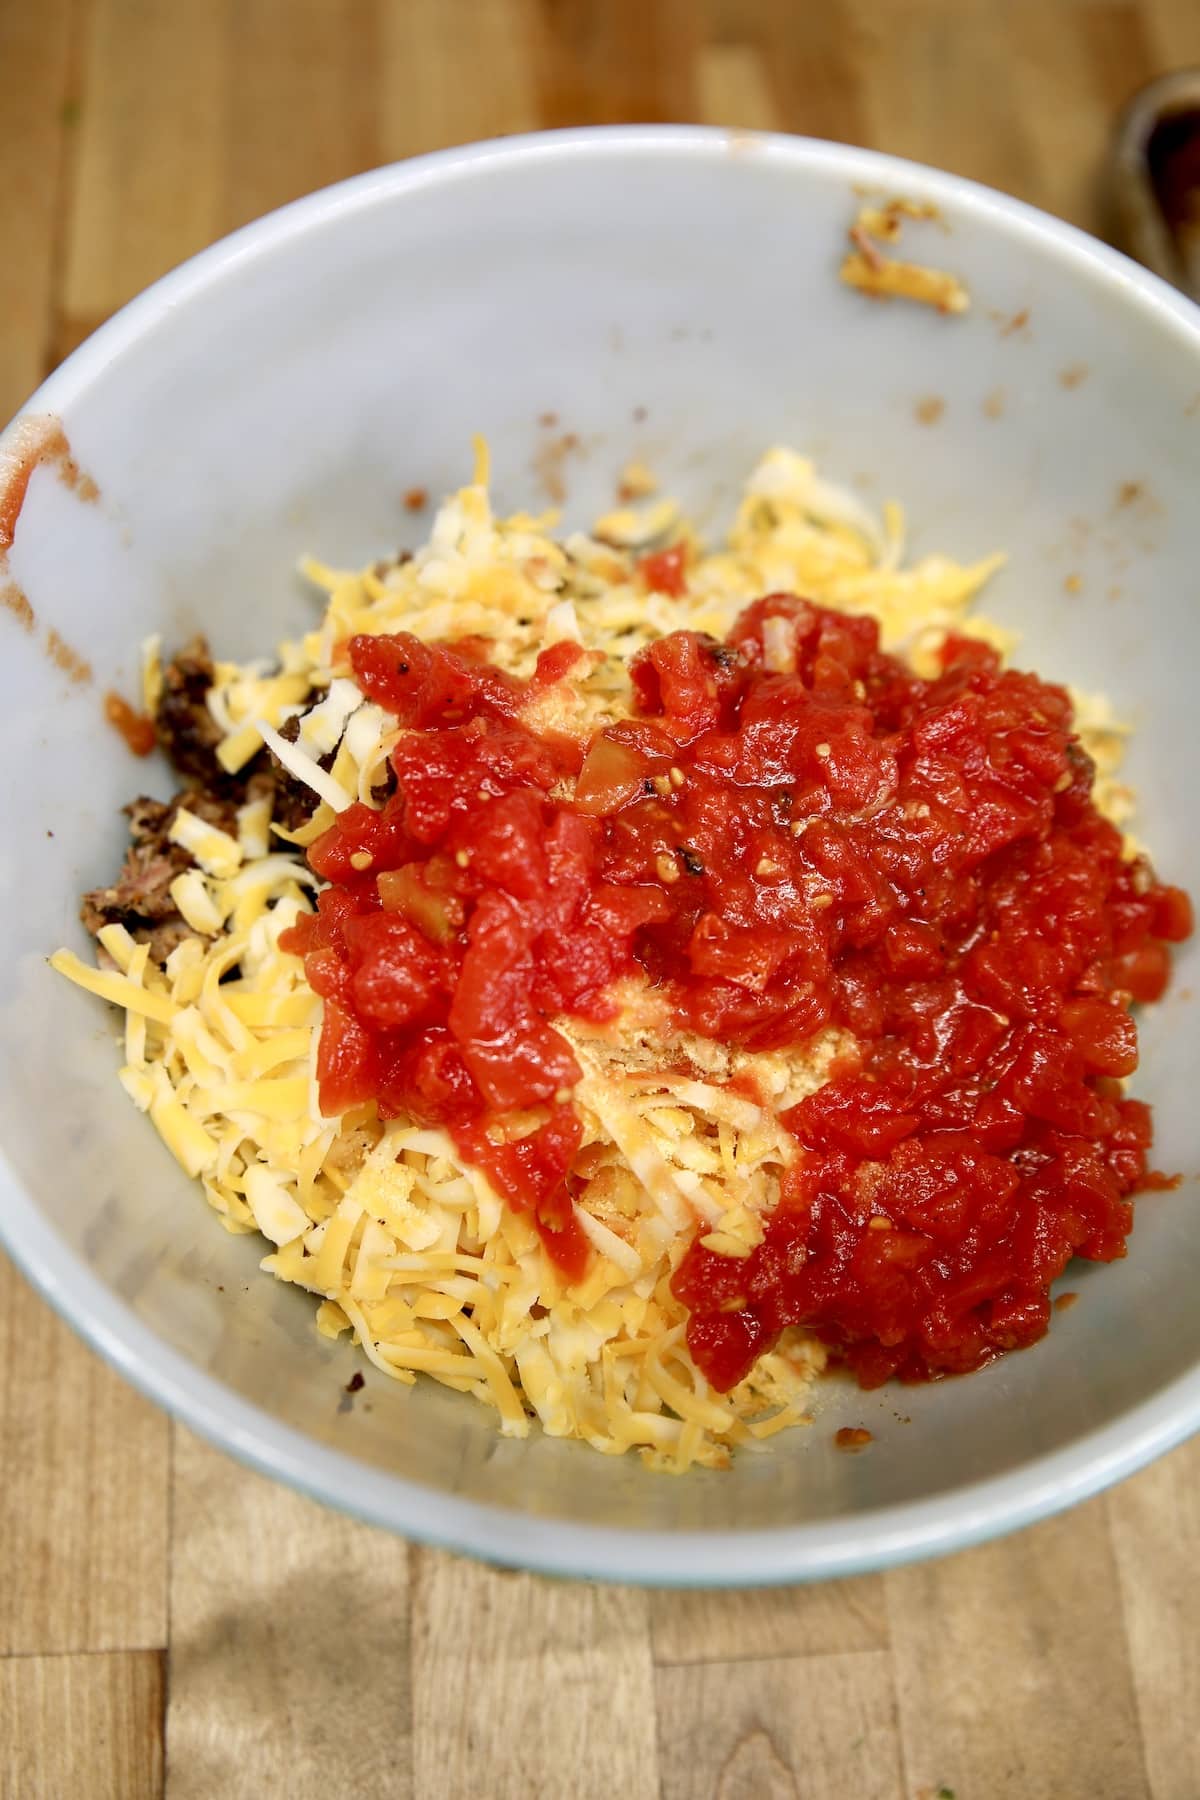 Bowl with tomatoes, cheese, brisket.